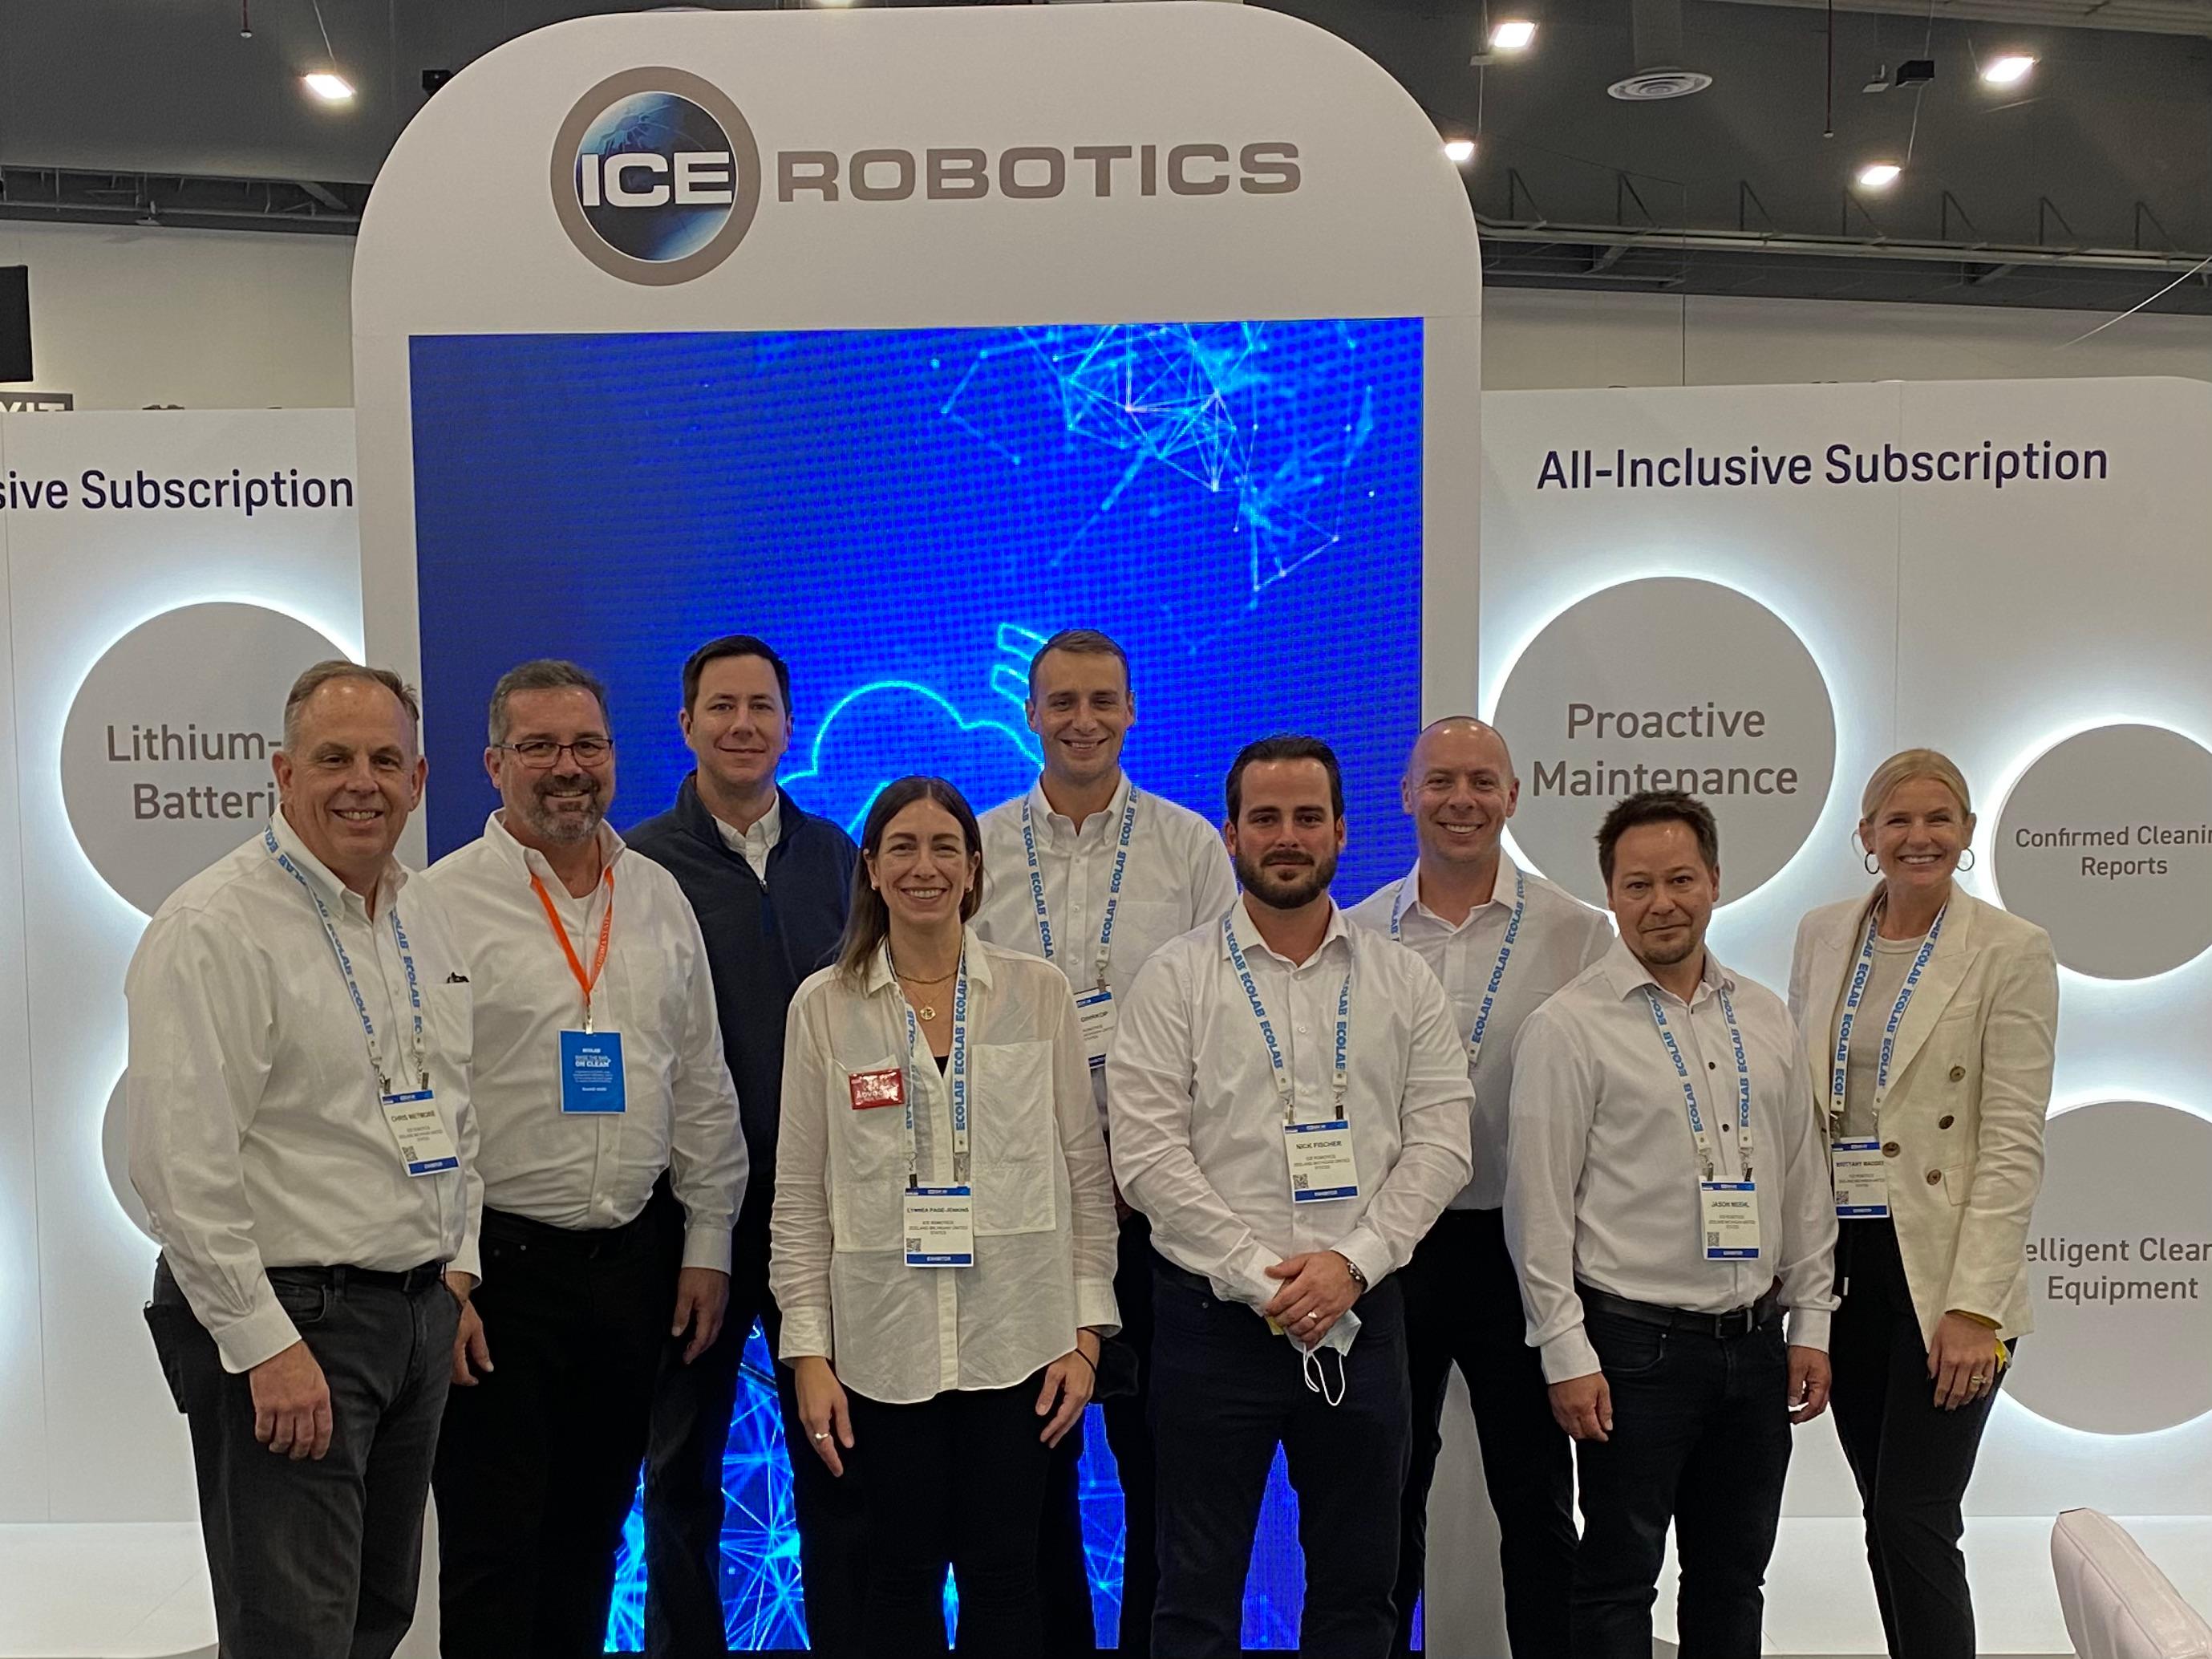 ICE Cobotics ISSA 2021 team members stand in front of large video wall playing fleet management technology video